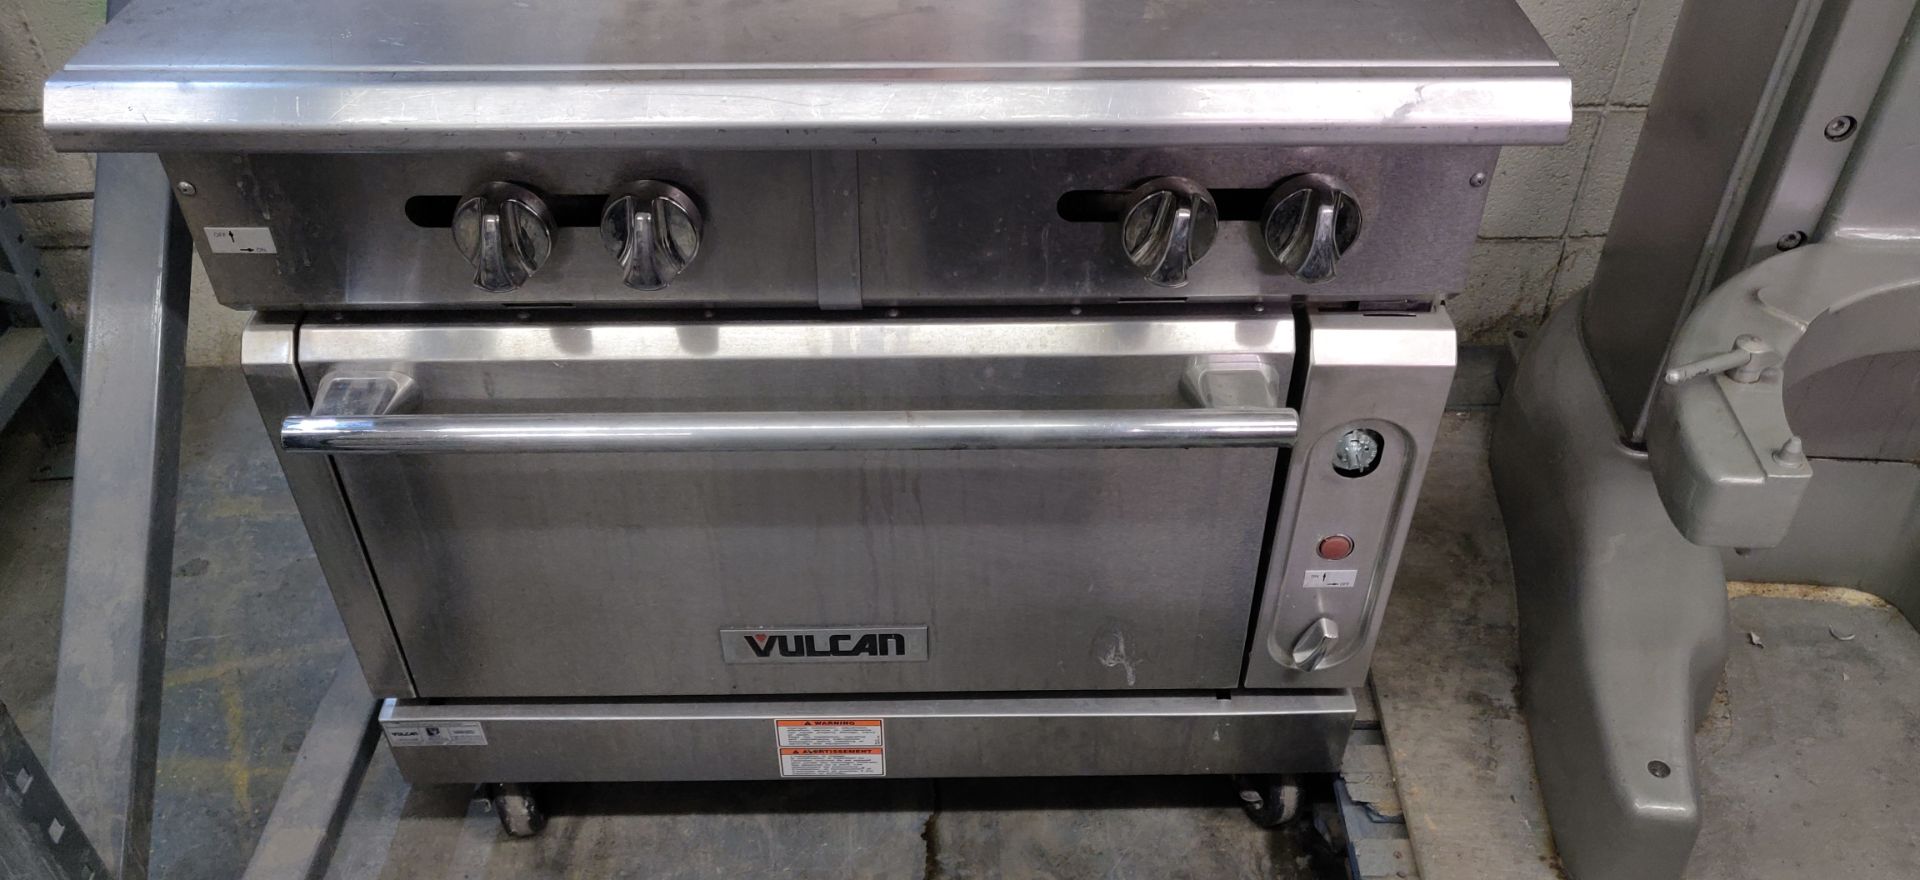 VULCAN STOVE / OVEN - Image 2 of 4